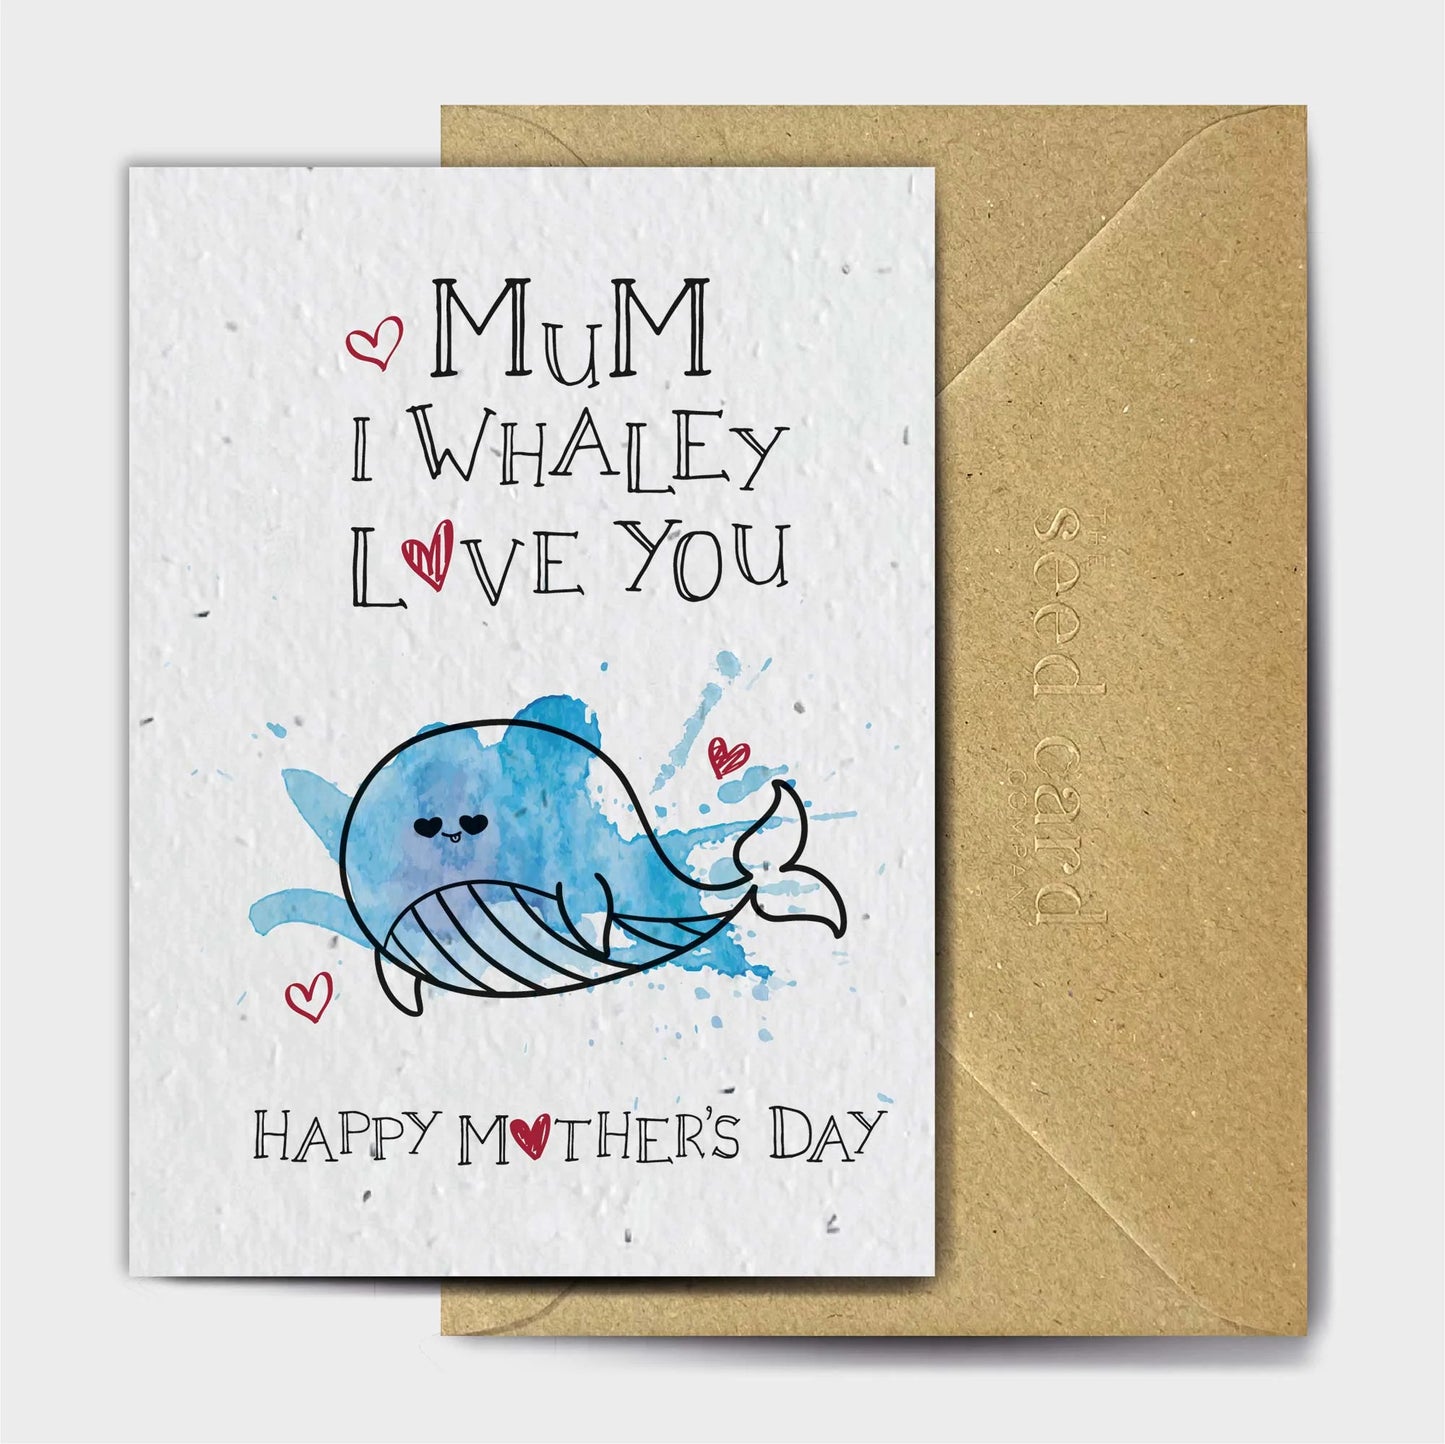 Mum I Whaley Love You - Plantable Seed Card